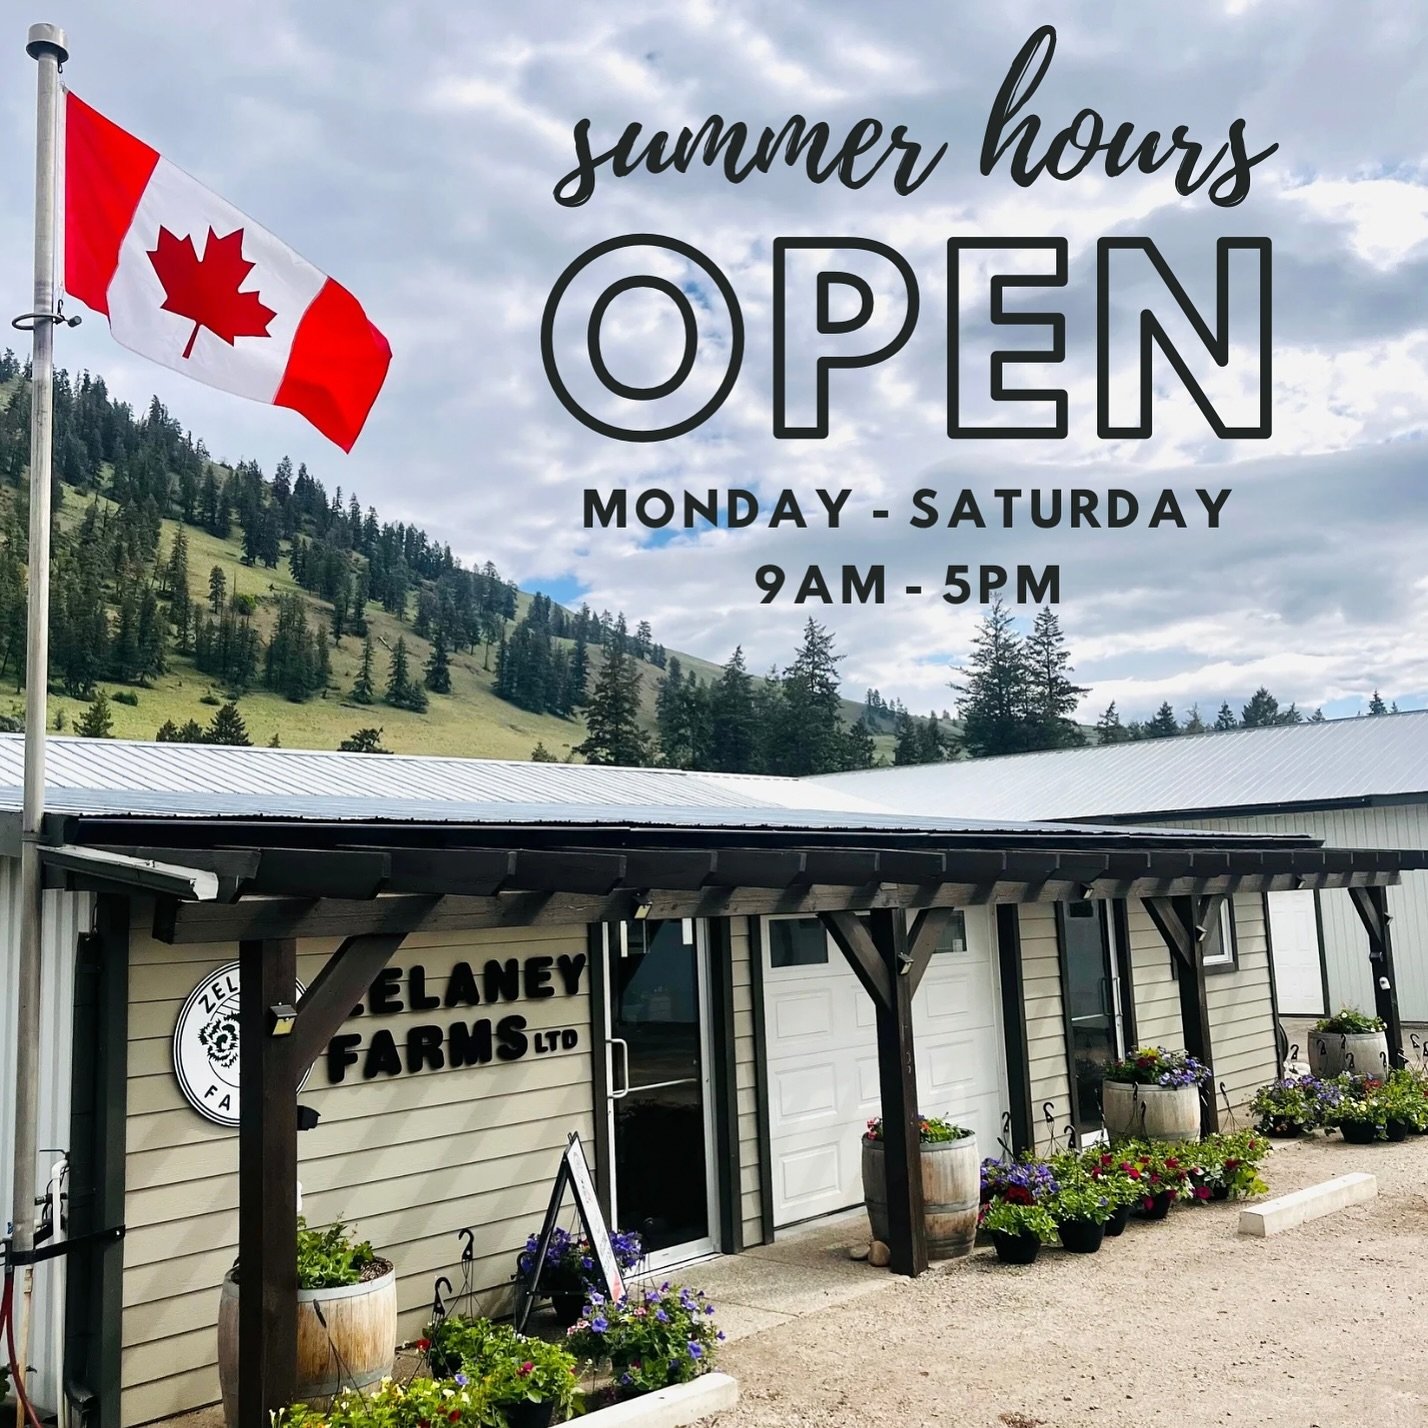 💥 OPEN FOR THE SEASON! 💥
Our Farm Shoppe is officially open 6 days a week, starting TODAY! Now open Monday thru Saturday from 9am to 5pm until the end of October. 

🥕 We&rsquo;ve still got our super sweet carrots and beets, and our fresh spinach i